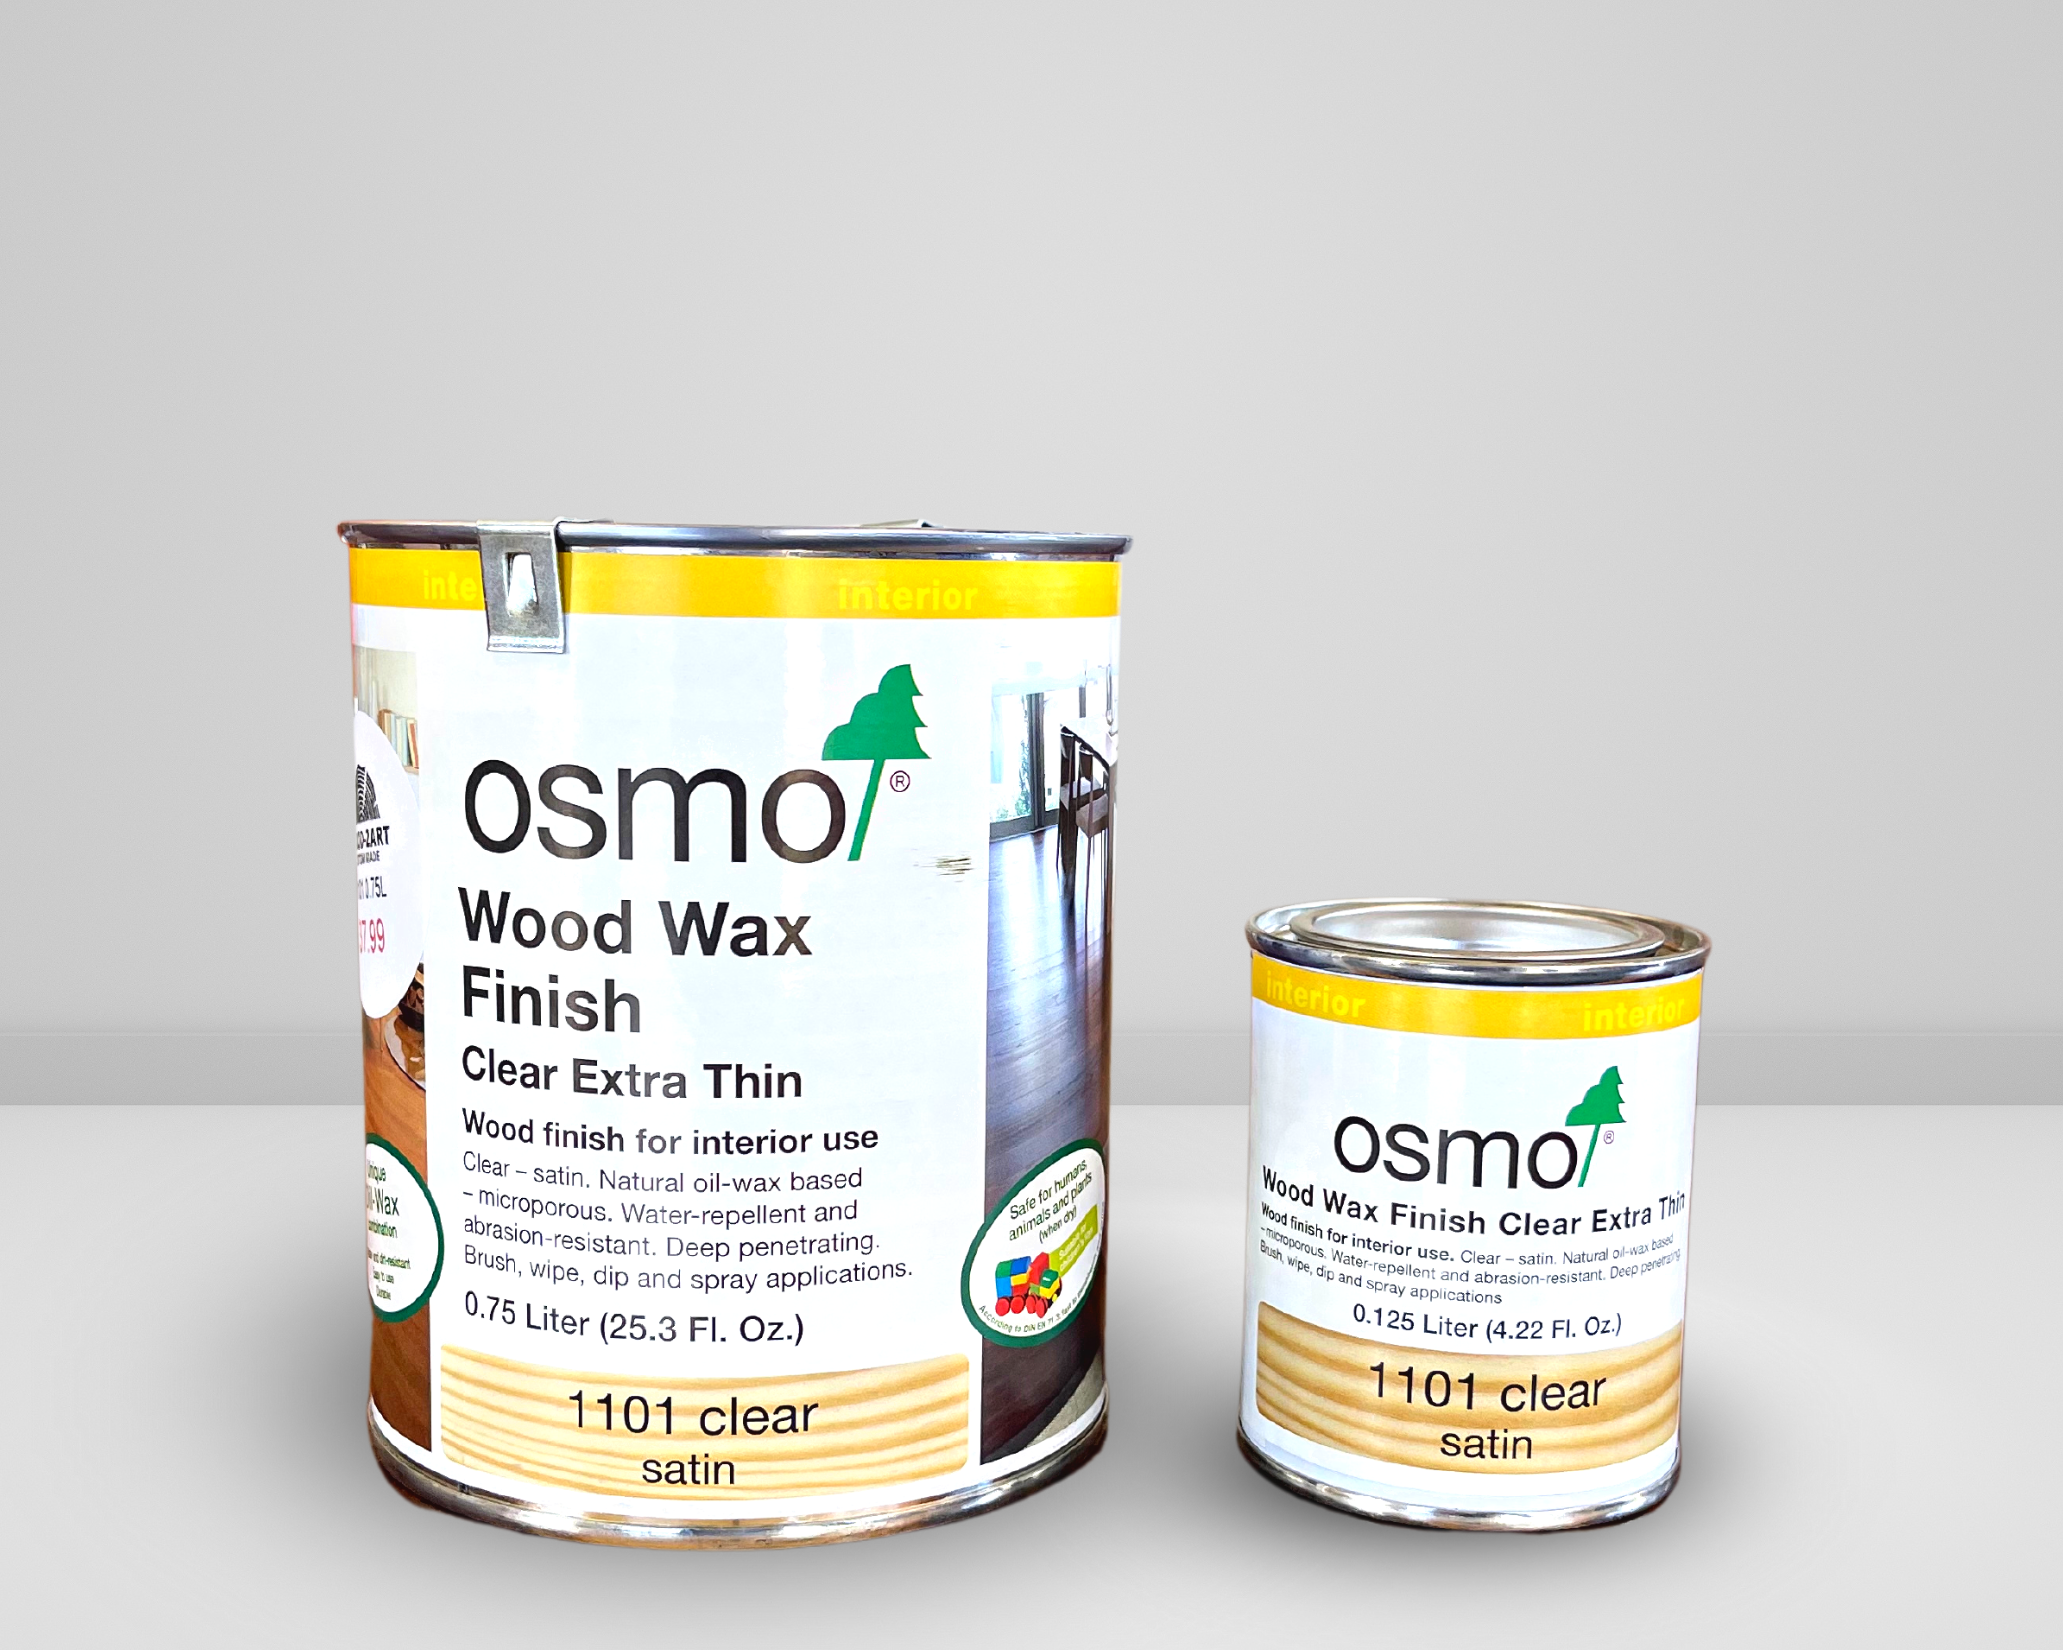 Osmo Wood Wax Finish Clear Extra Thin 0.75 Liter / 1101 Clear Satin